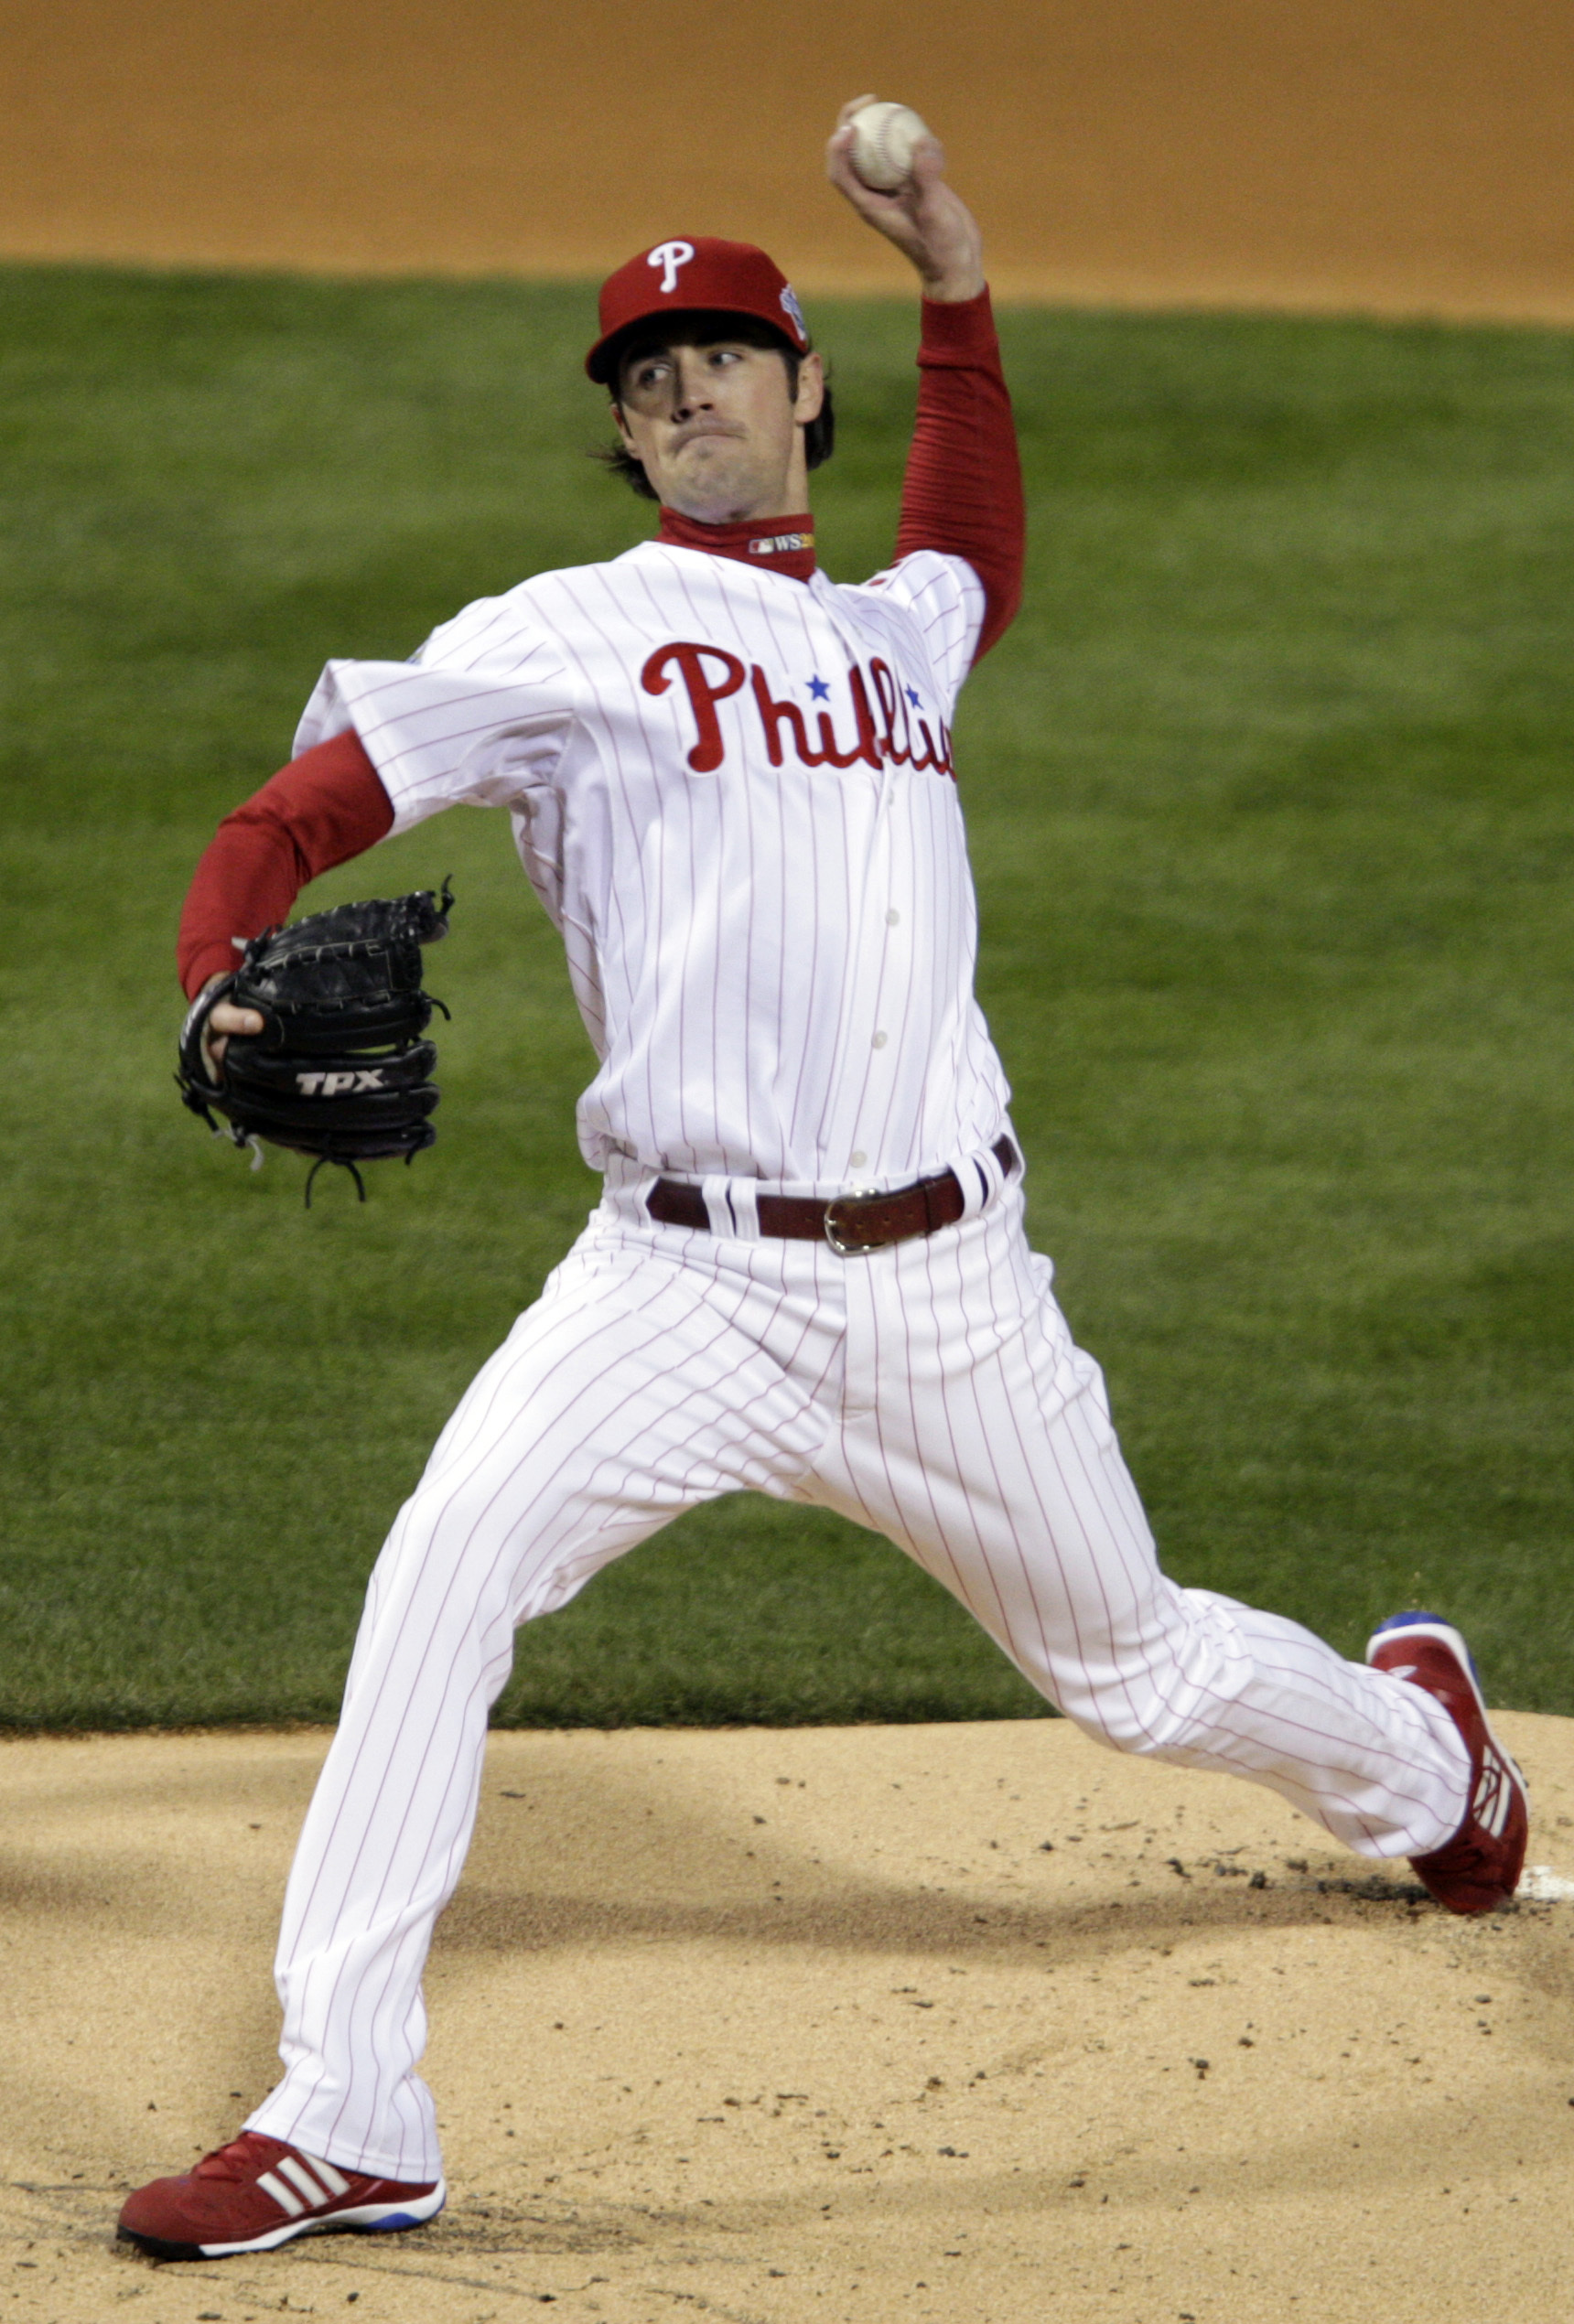 Former Cubs pitcher Cole Hamels retires from baseball – NBC Sports